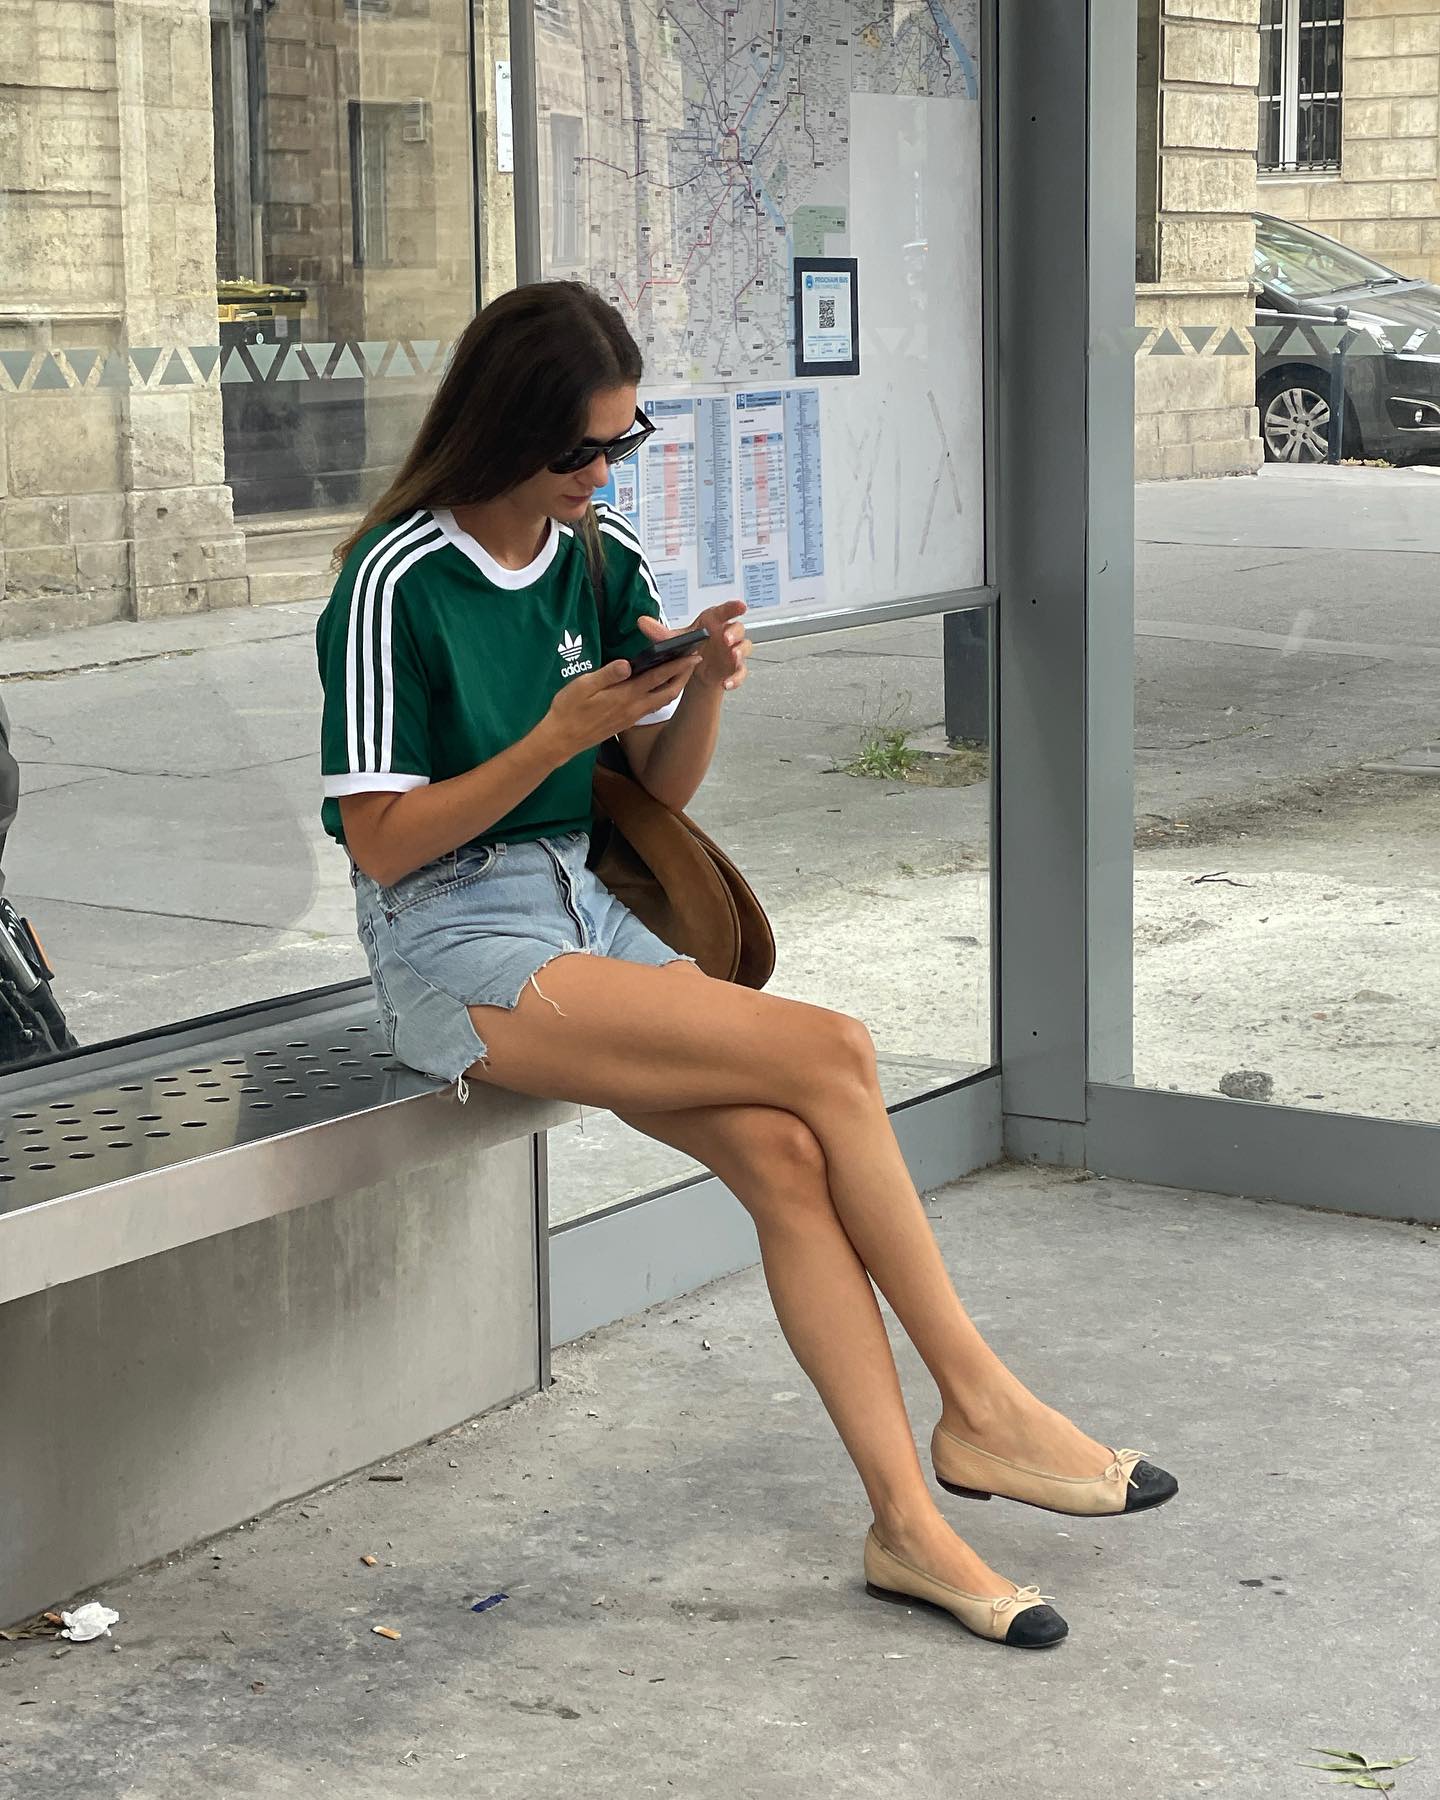 French fashion influencer Anne Laure Mais sits on a bench at a bus stop in Paris wearing a green striped Adidas t-shirt, cut-off denim shorts, and Chanel cap-toe flats